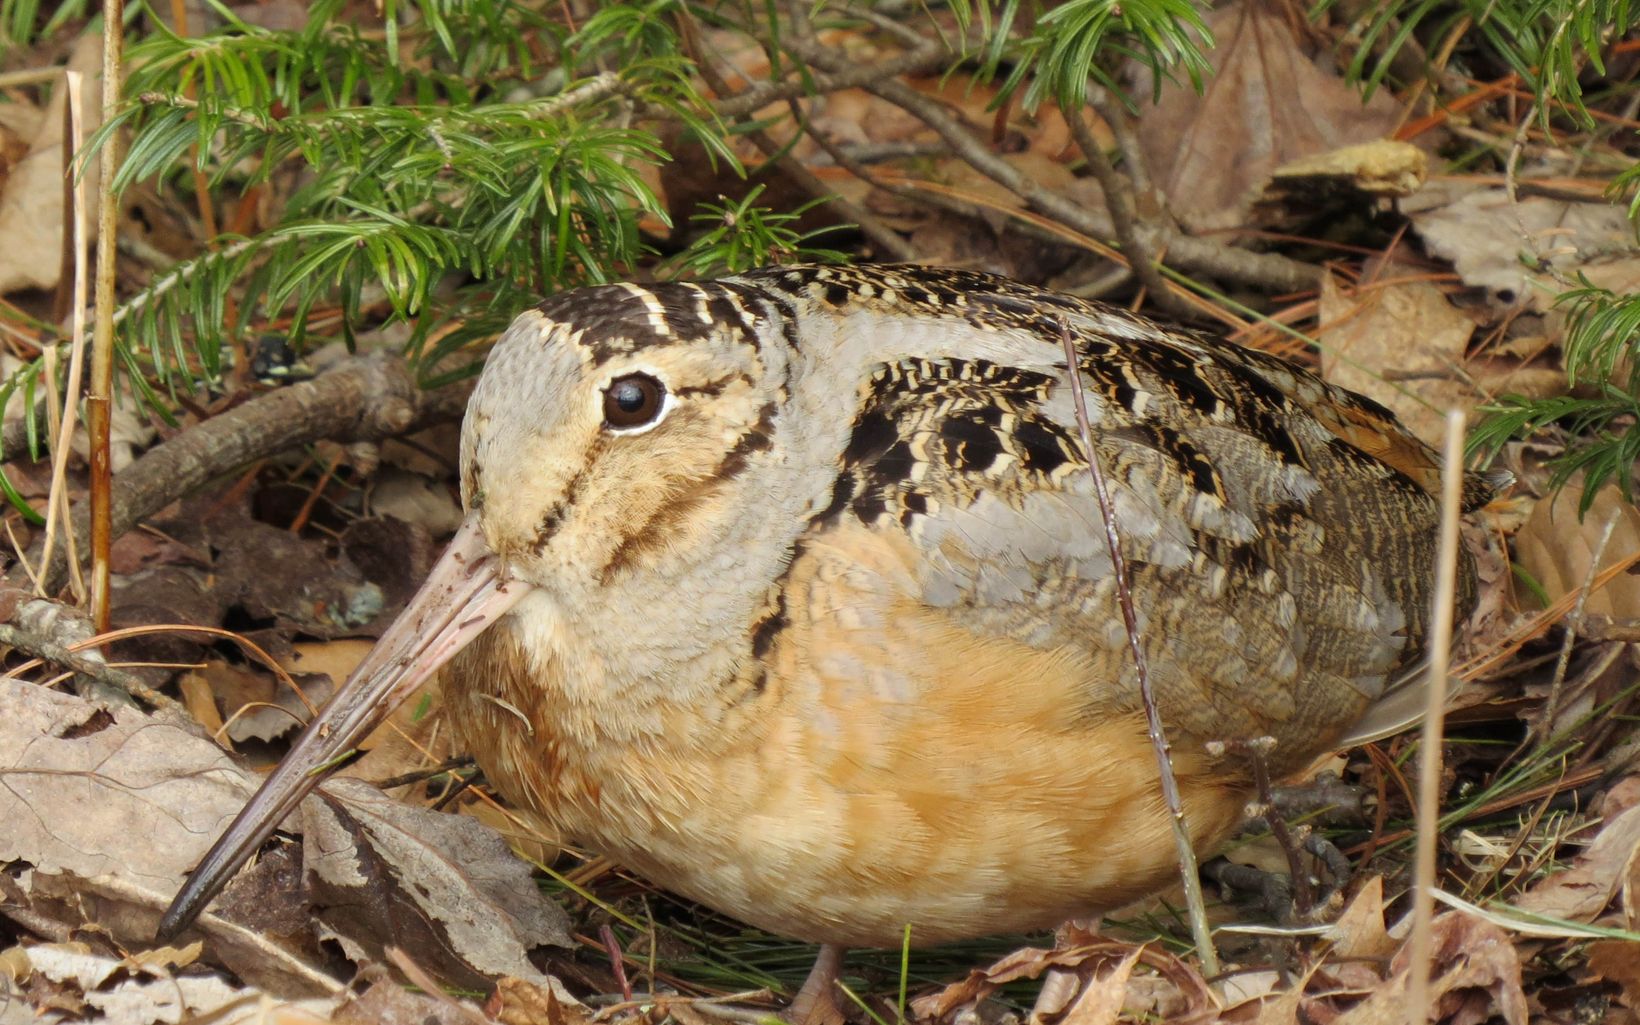 A brown bird rests on the forest floor.